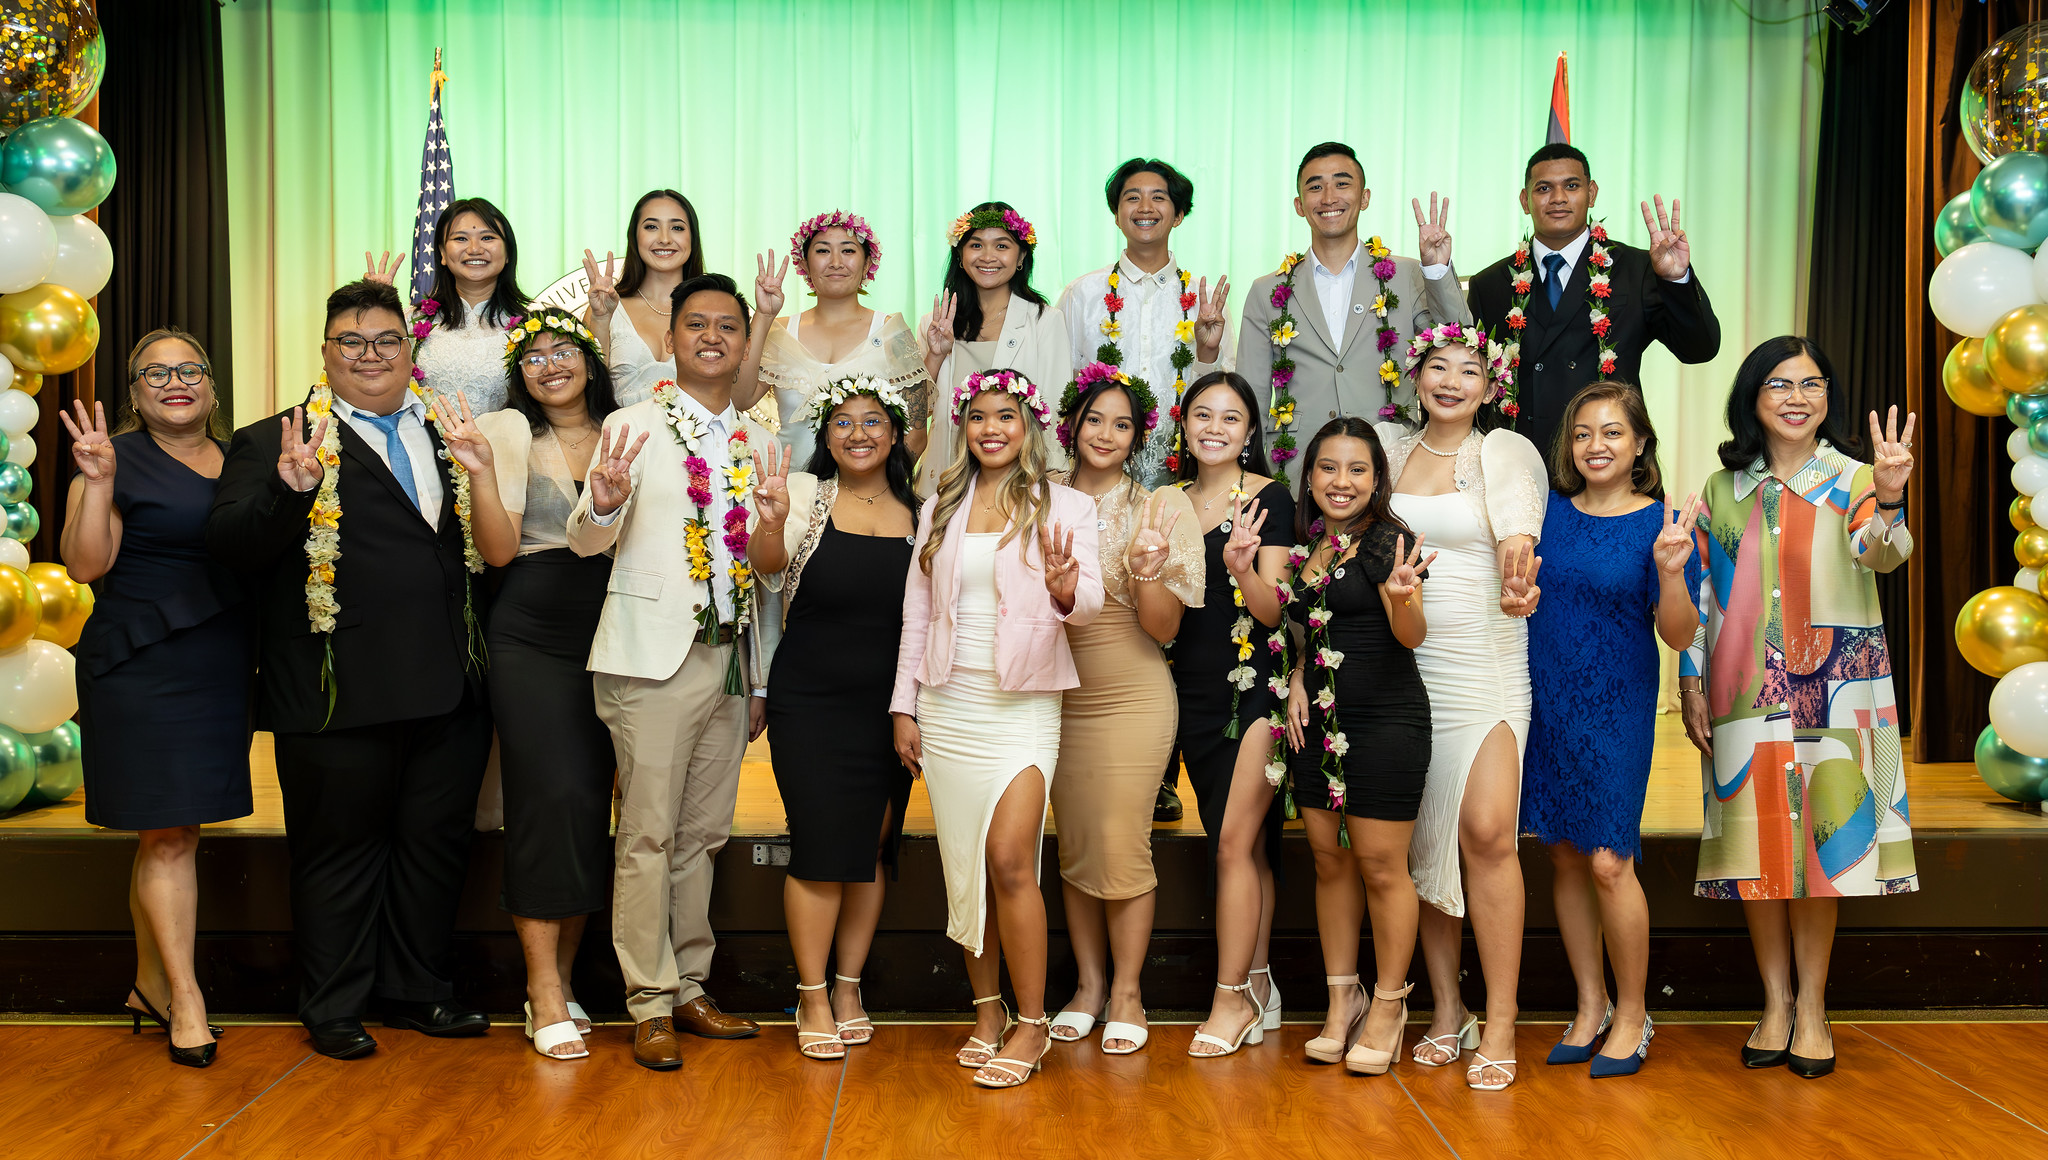 Group photo of the UOG 62nd Student Government Association